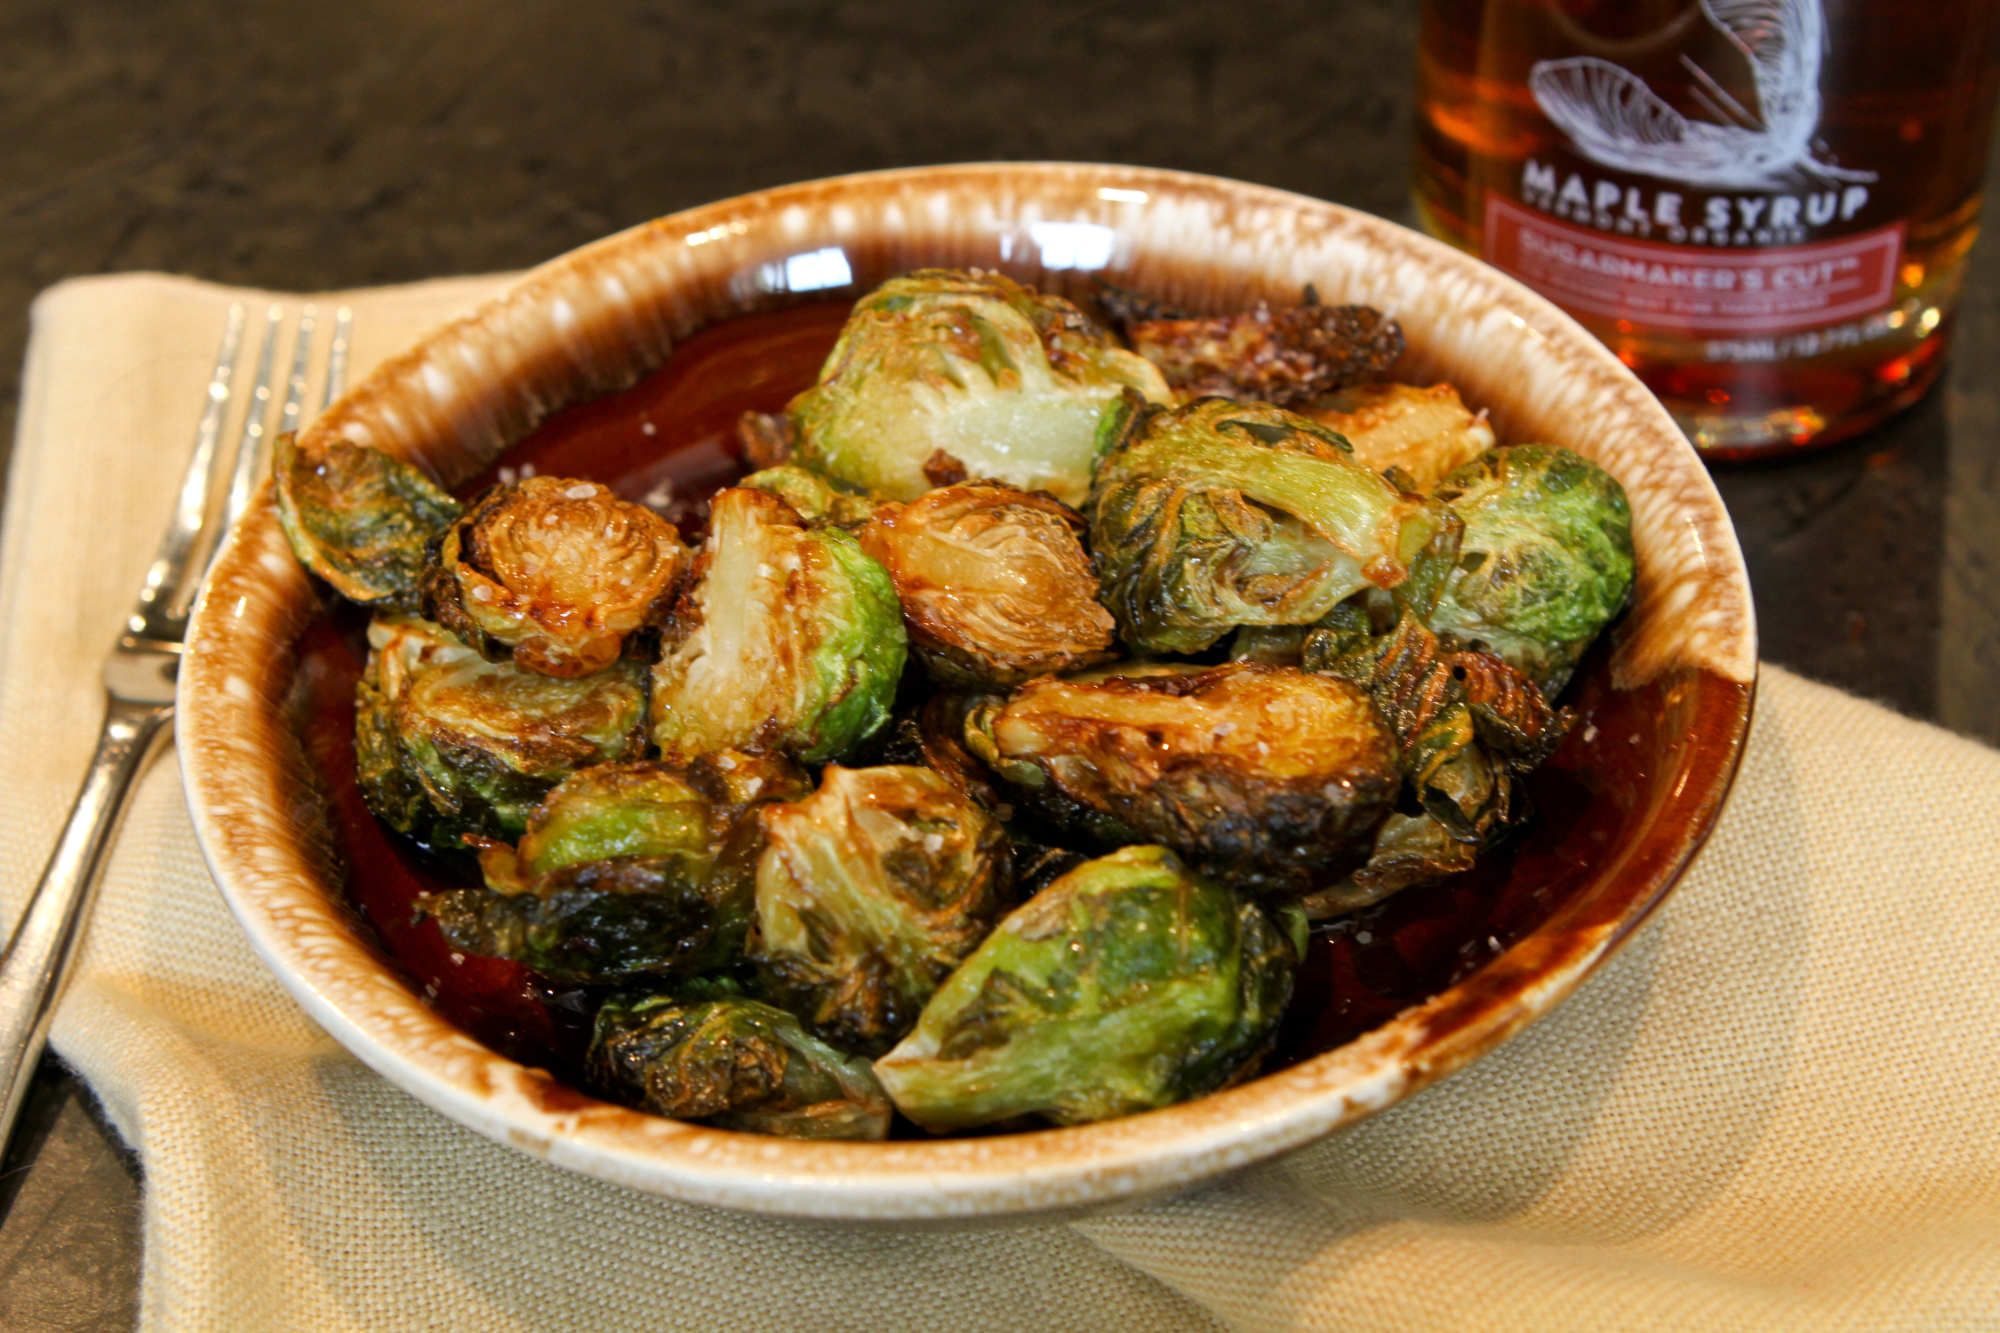 Roasted Brussel Sprouts with Maple Syrup by Runamok